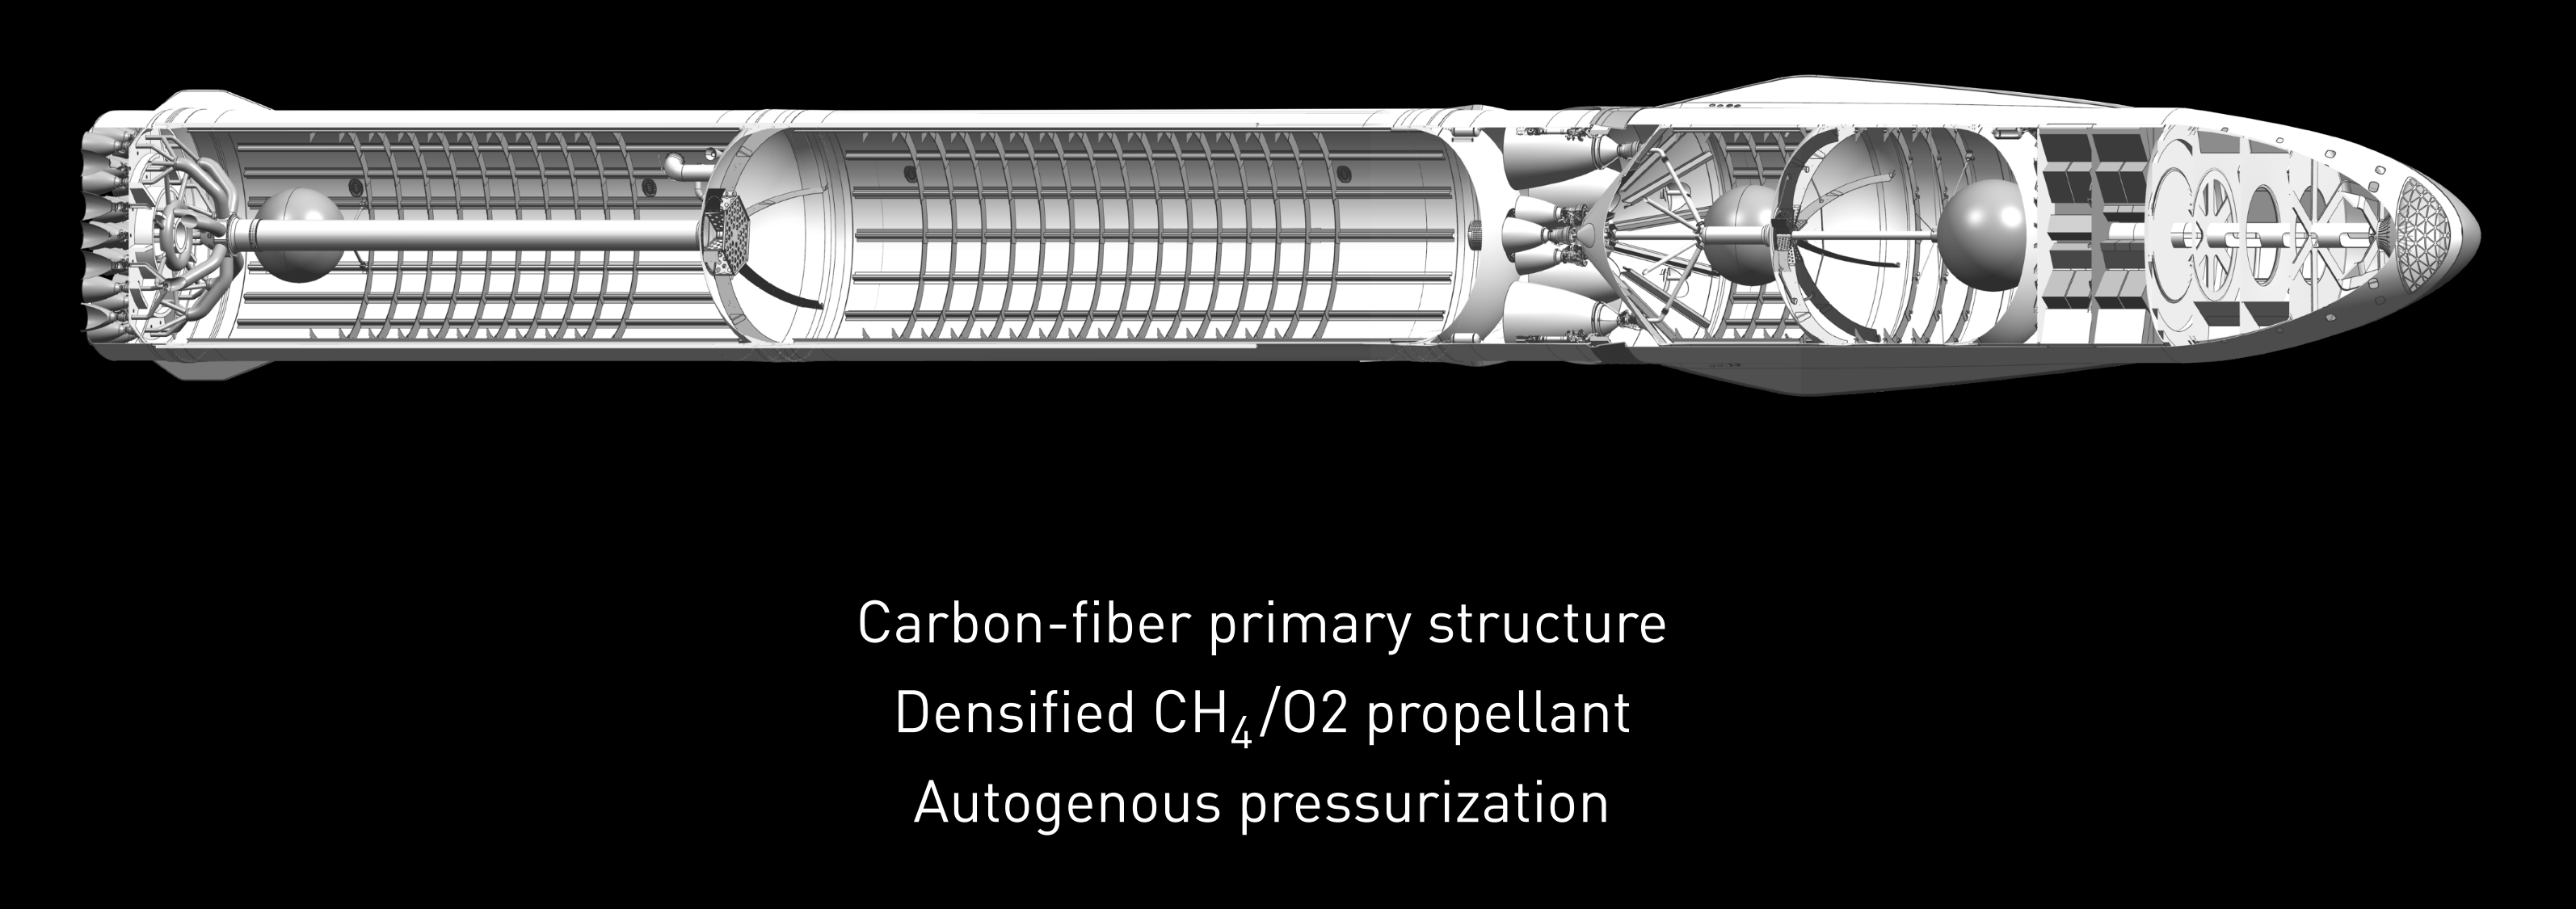 Interplanetary Transport System overview 2016 (SpaceX) 1